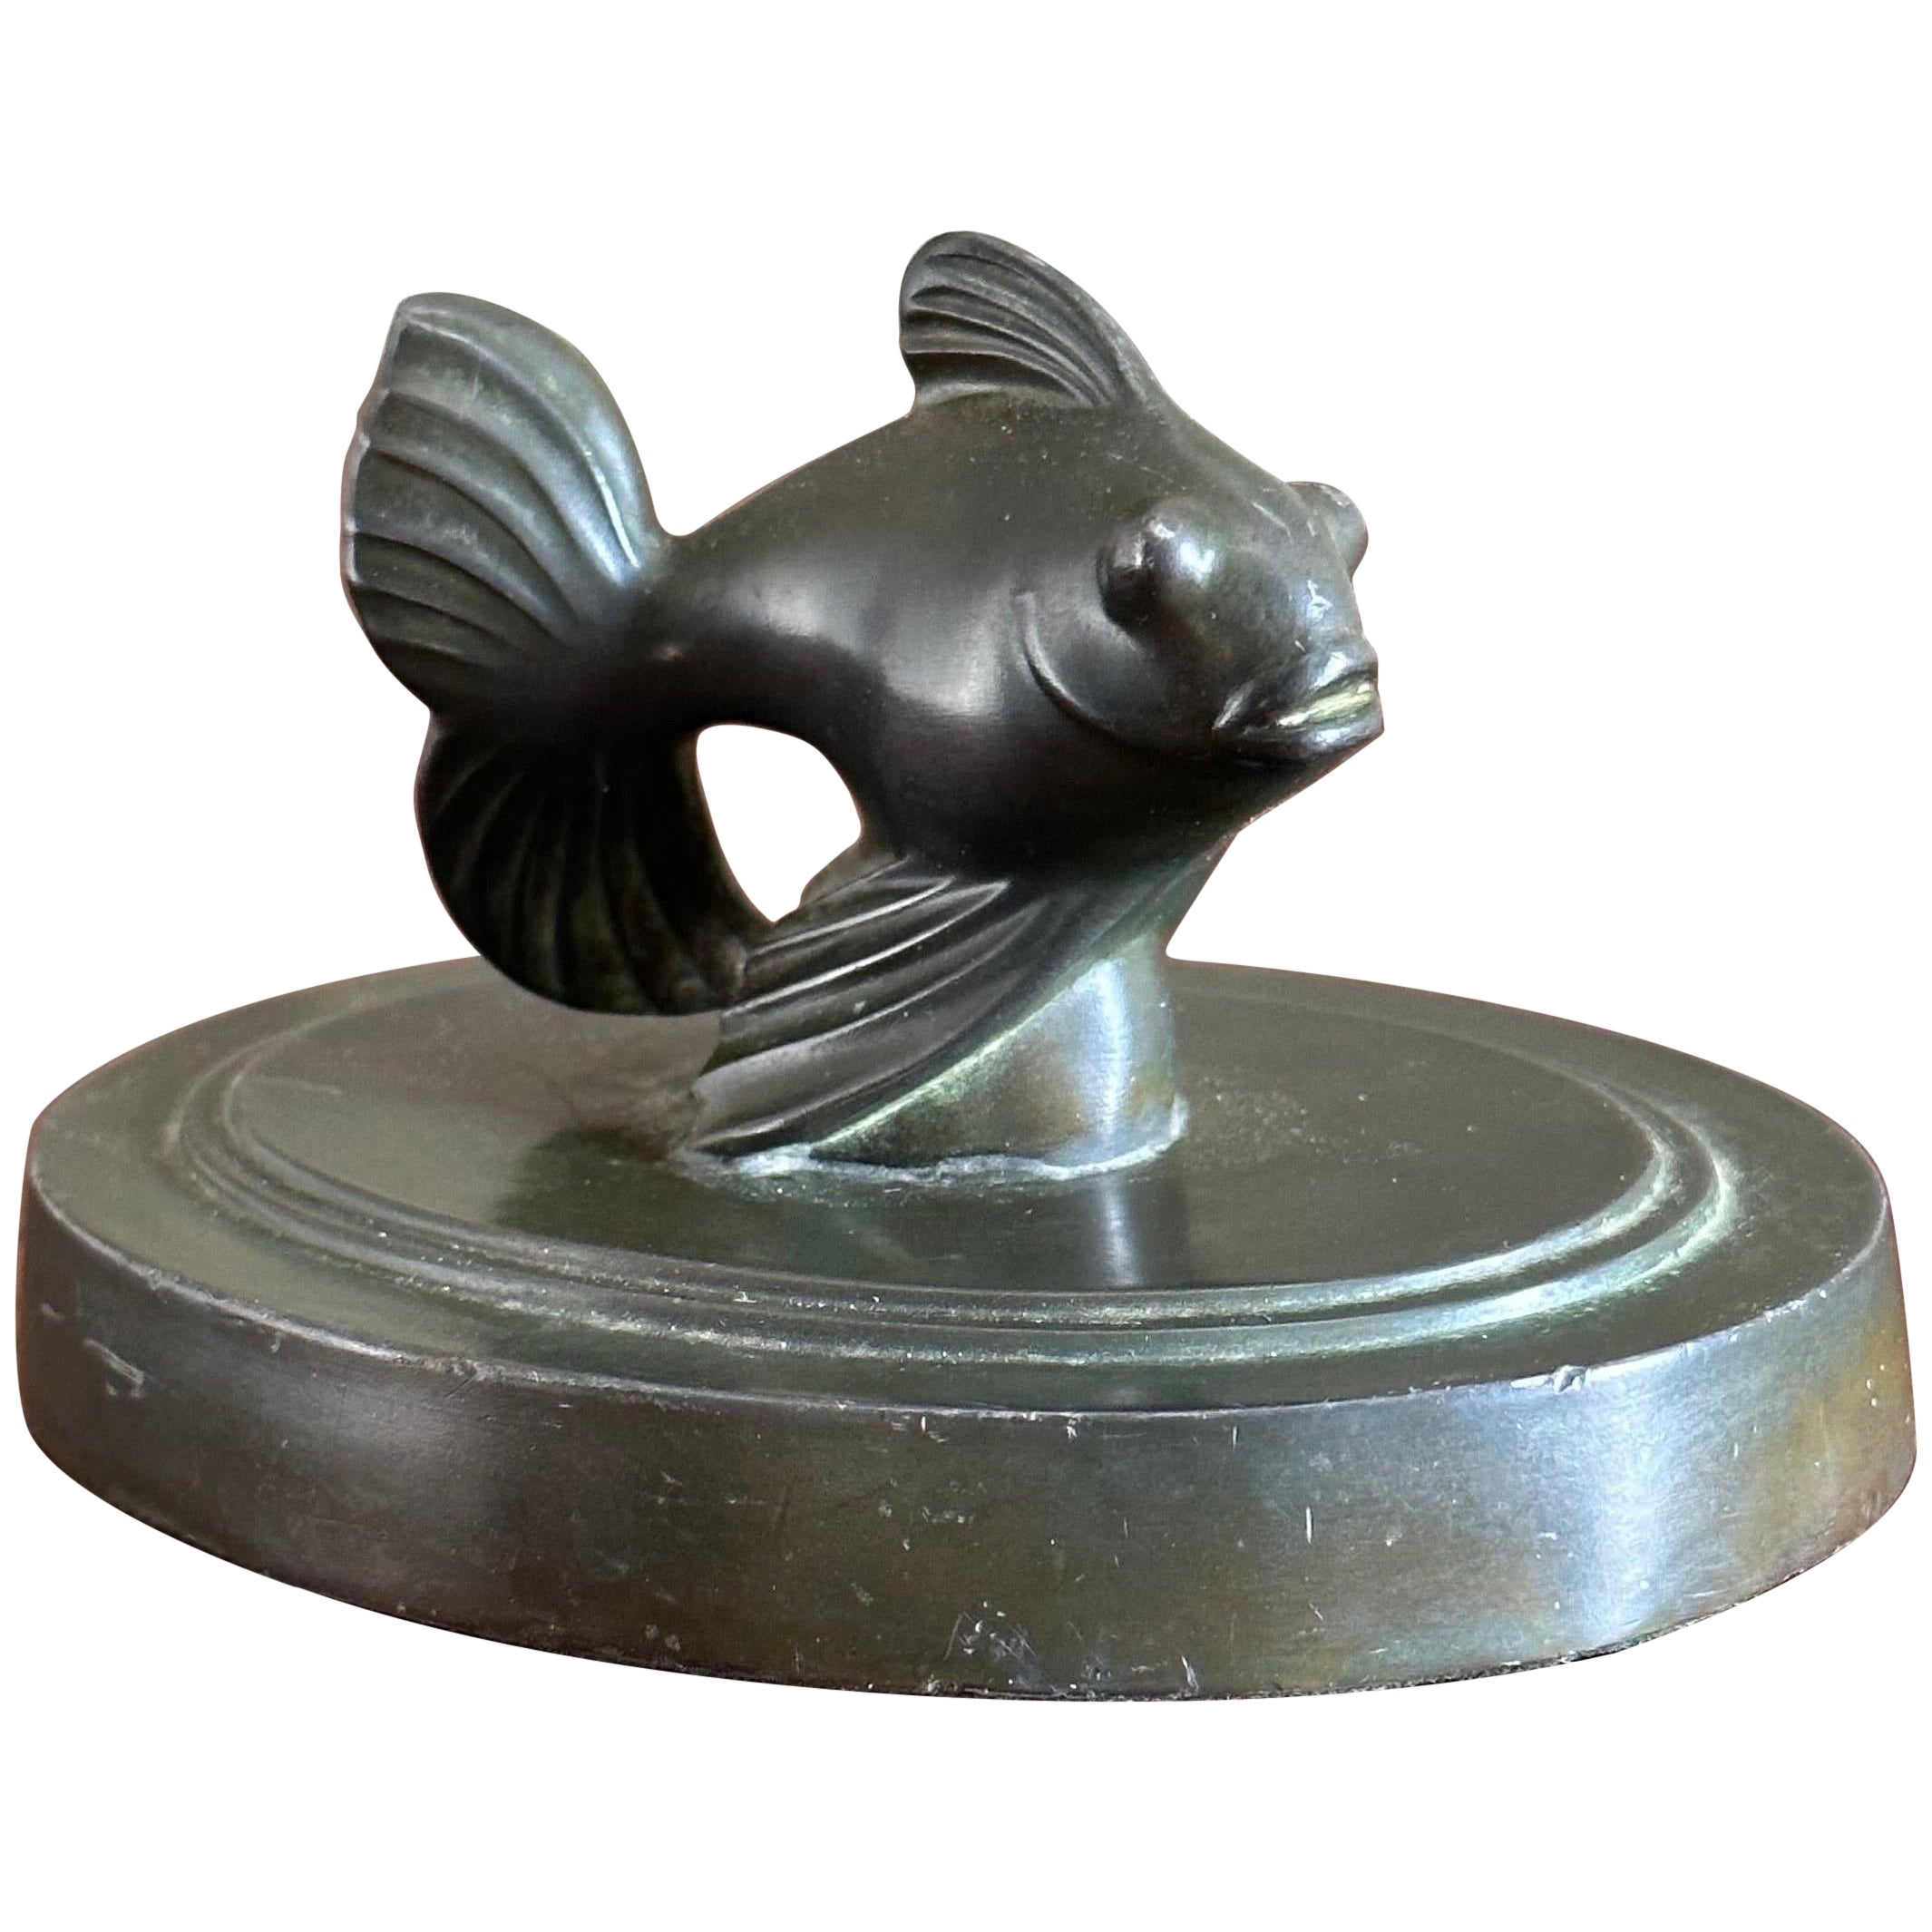 Just Andersen Fantail Fish Paperweight, 1930s, Art Deco